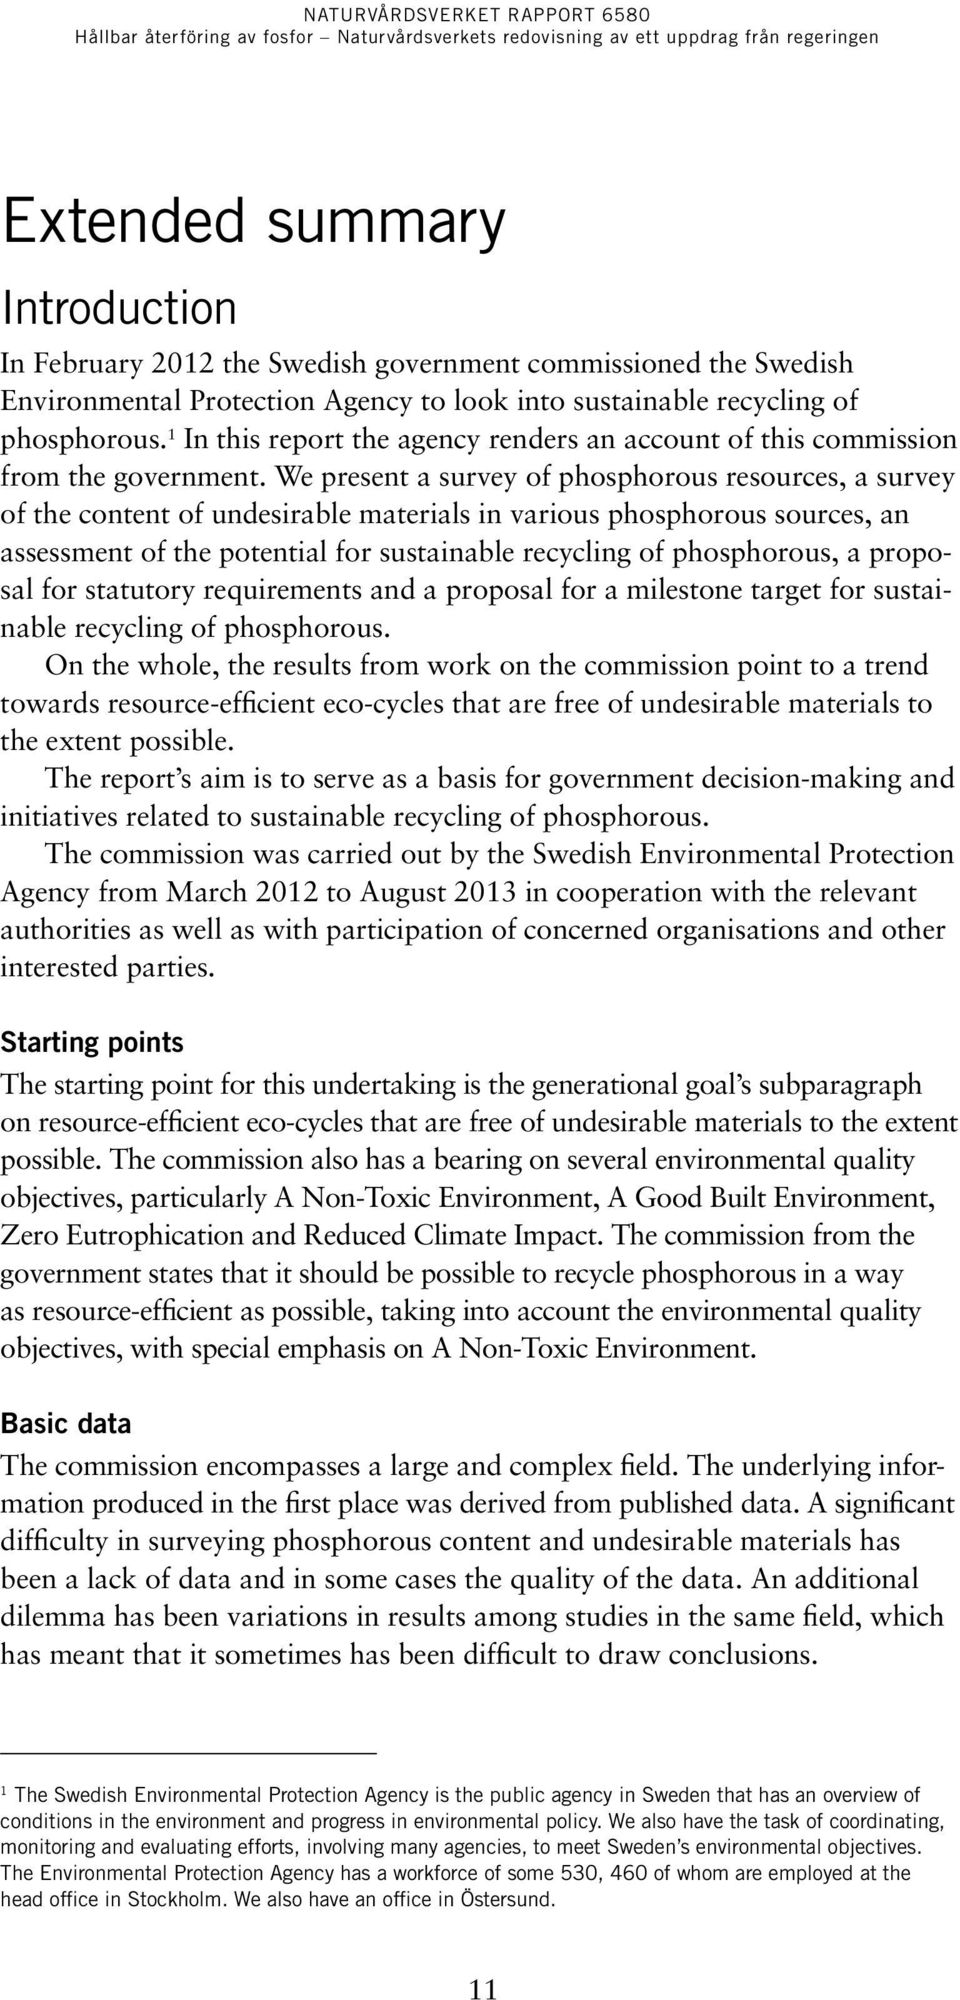 We present a survey of phosphorous resources, a survey of the content of undesirable materials in various phosphorous sources, an assessment of the potential for sustainable recycling of phosphorous,